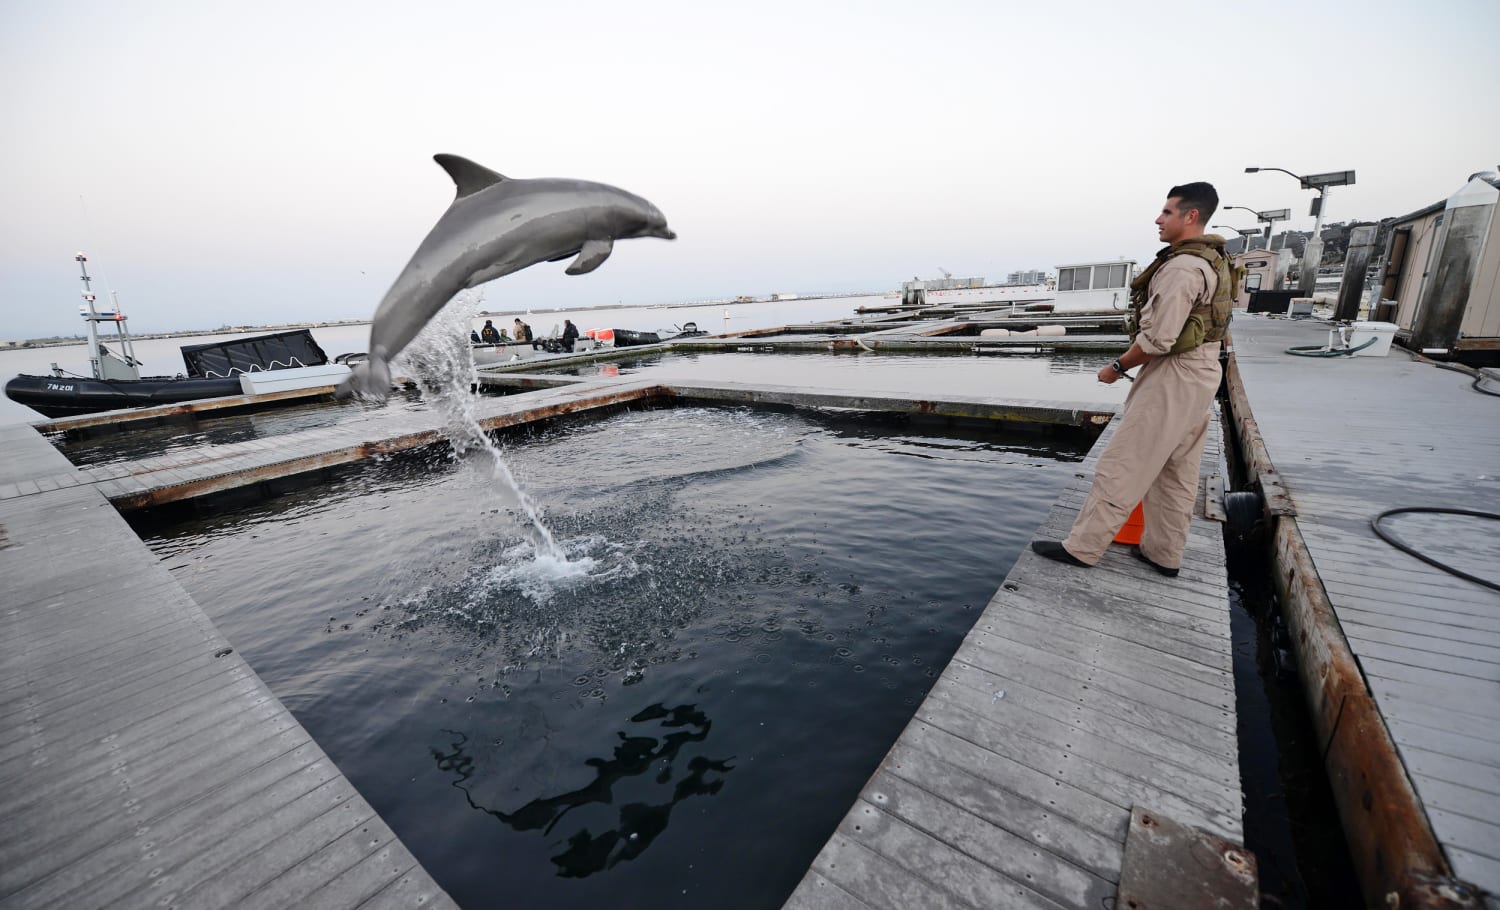 Russia's use of dolphins to guard its navy ships isn't so farfetched